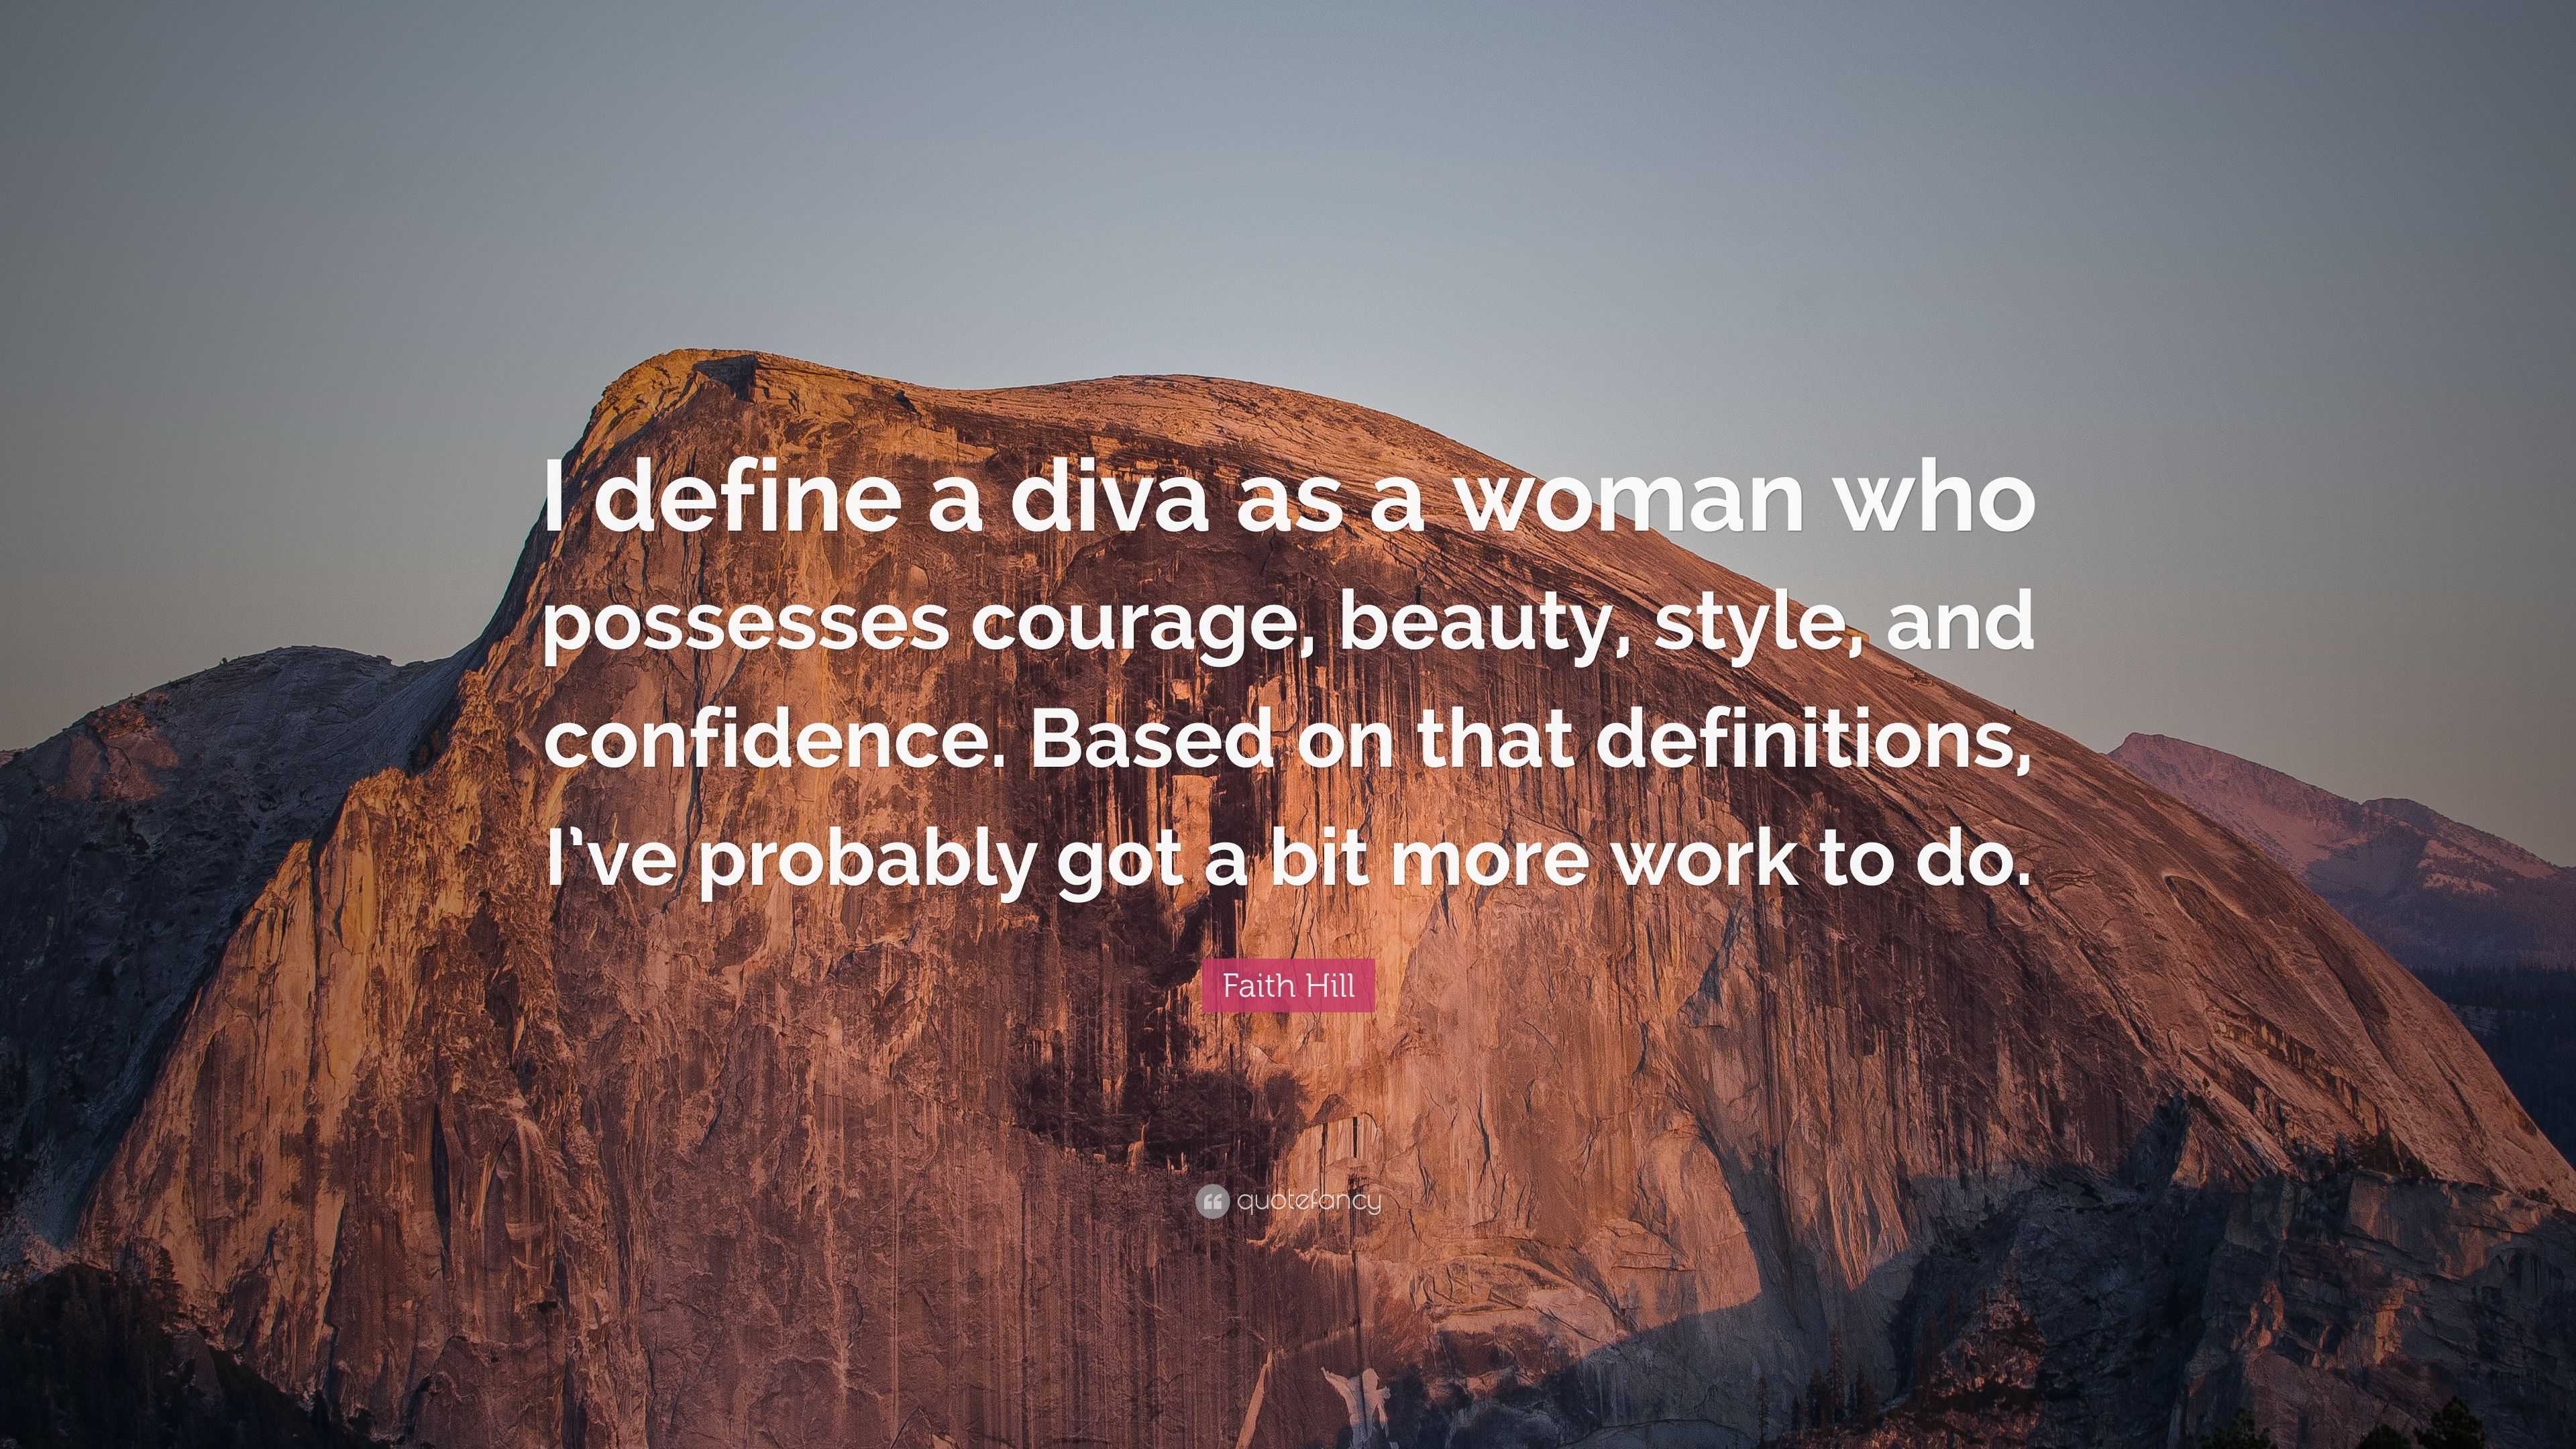 Faith Hill Quote: “I define a diva as who possesses courage, beauty, style, and confidence. Based on that definitions, I've probabl...”